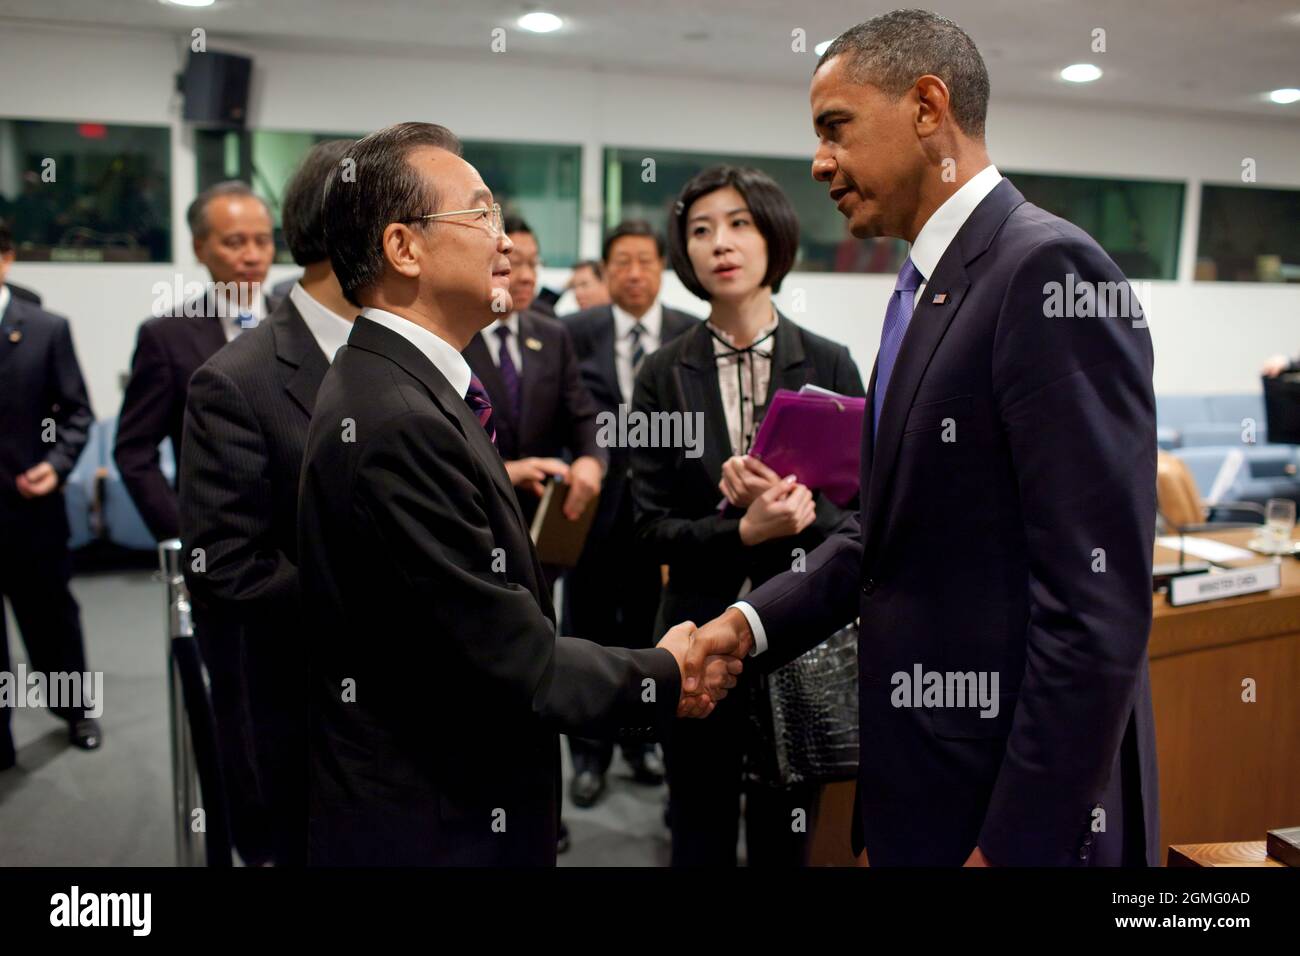 President Barack Obama greets Premier Wen Jiabao and members of the Chinese delegation after a bilateral meeting at the United Nations in New York, N.Y., Sept. 23, 2010. (Official White House Photo by Pete Souza) This official White House photograph is being made available only for publication by news organizations and/or for personal use printing by the subject(s) of the photograph. The photograph may not be manipulated in any way and may not be used in commercial or political materials, advertisements, emails, products, promotions that in any way suggests approval or endorsement of the Presi Stock Photo